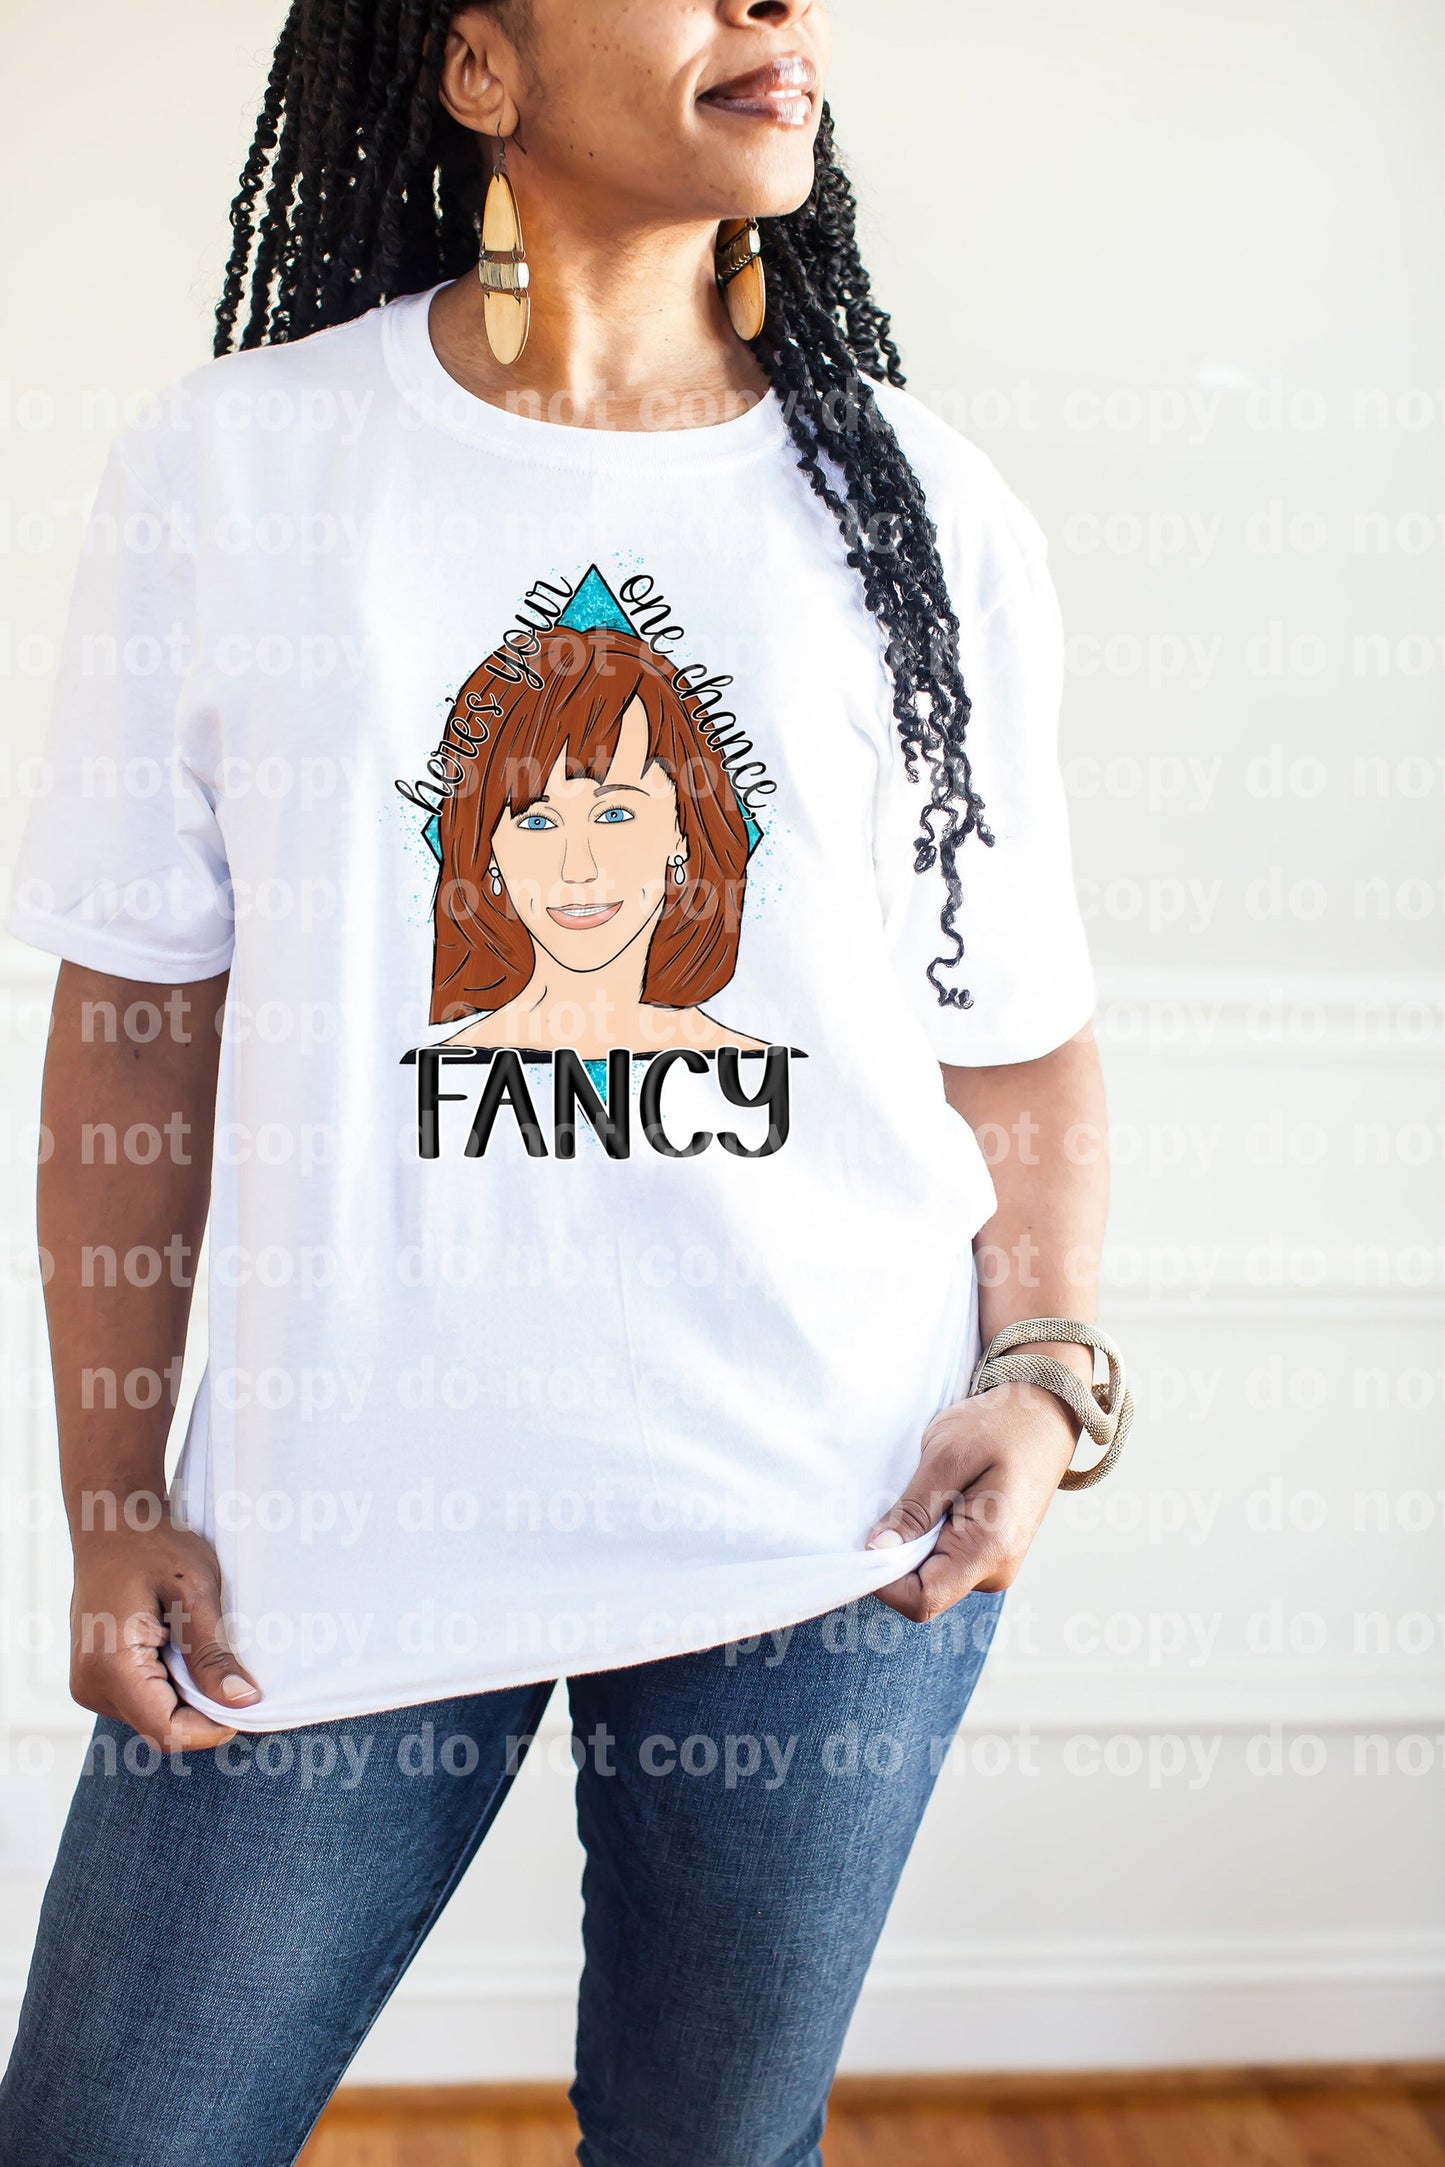 Here's Your One Chance Fancy Dream Print or Sublimation Print